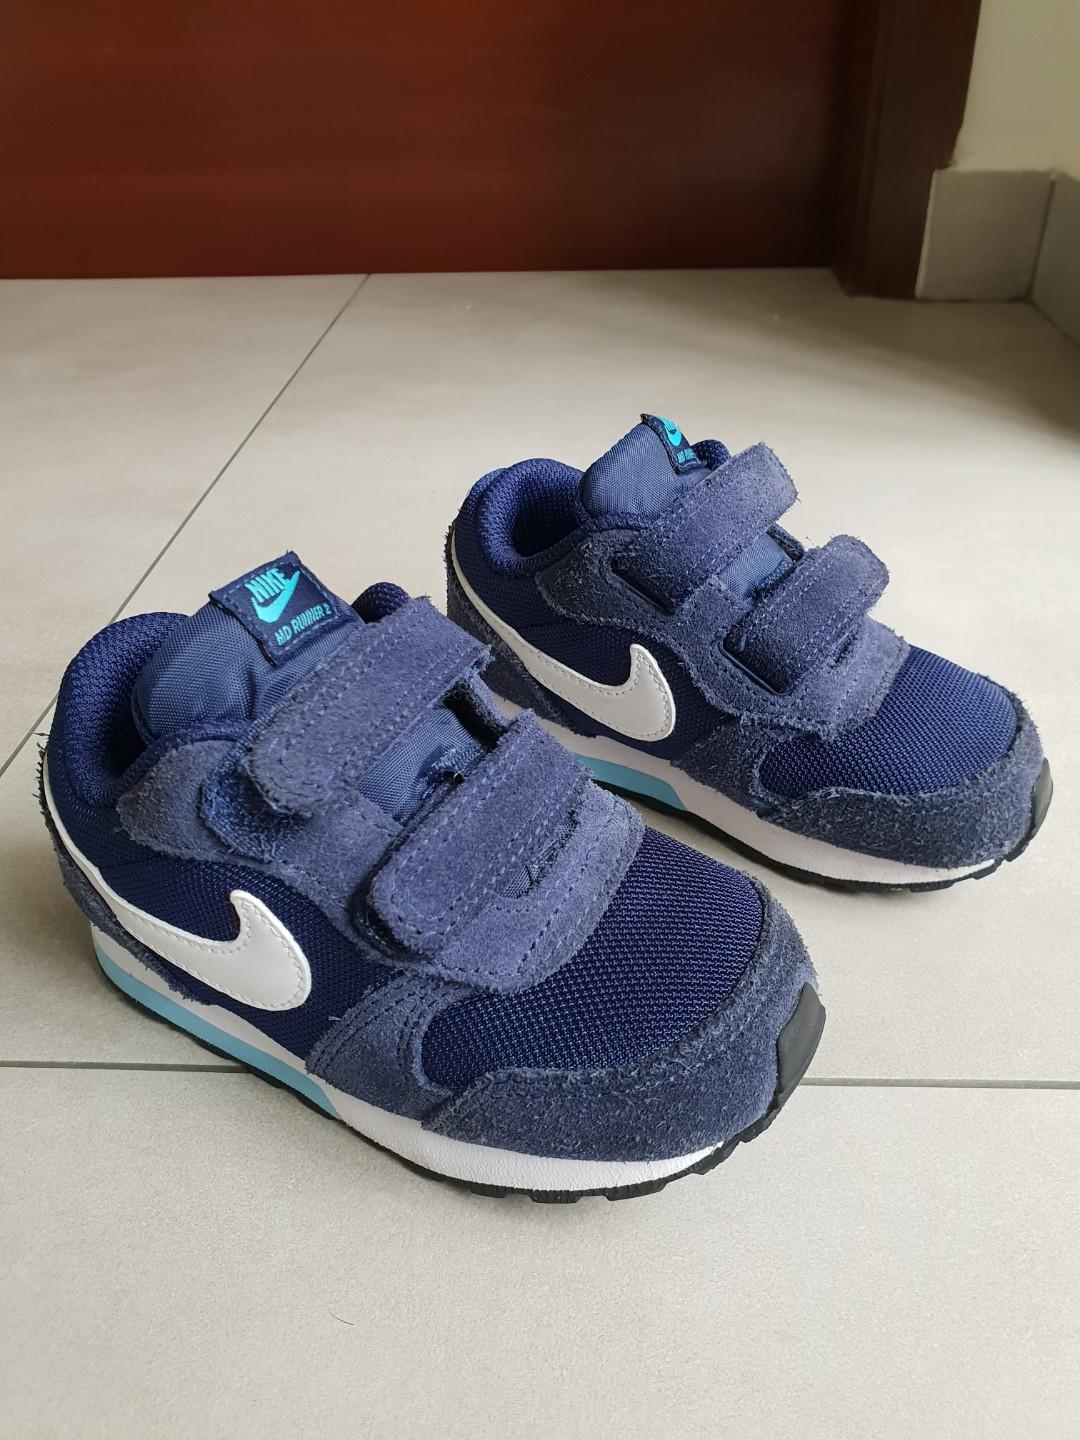 2 year old nike shoes